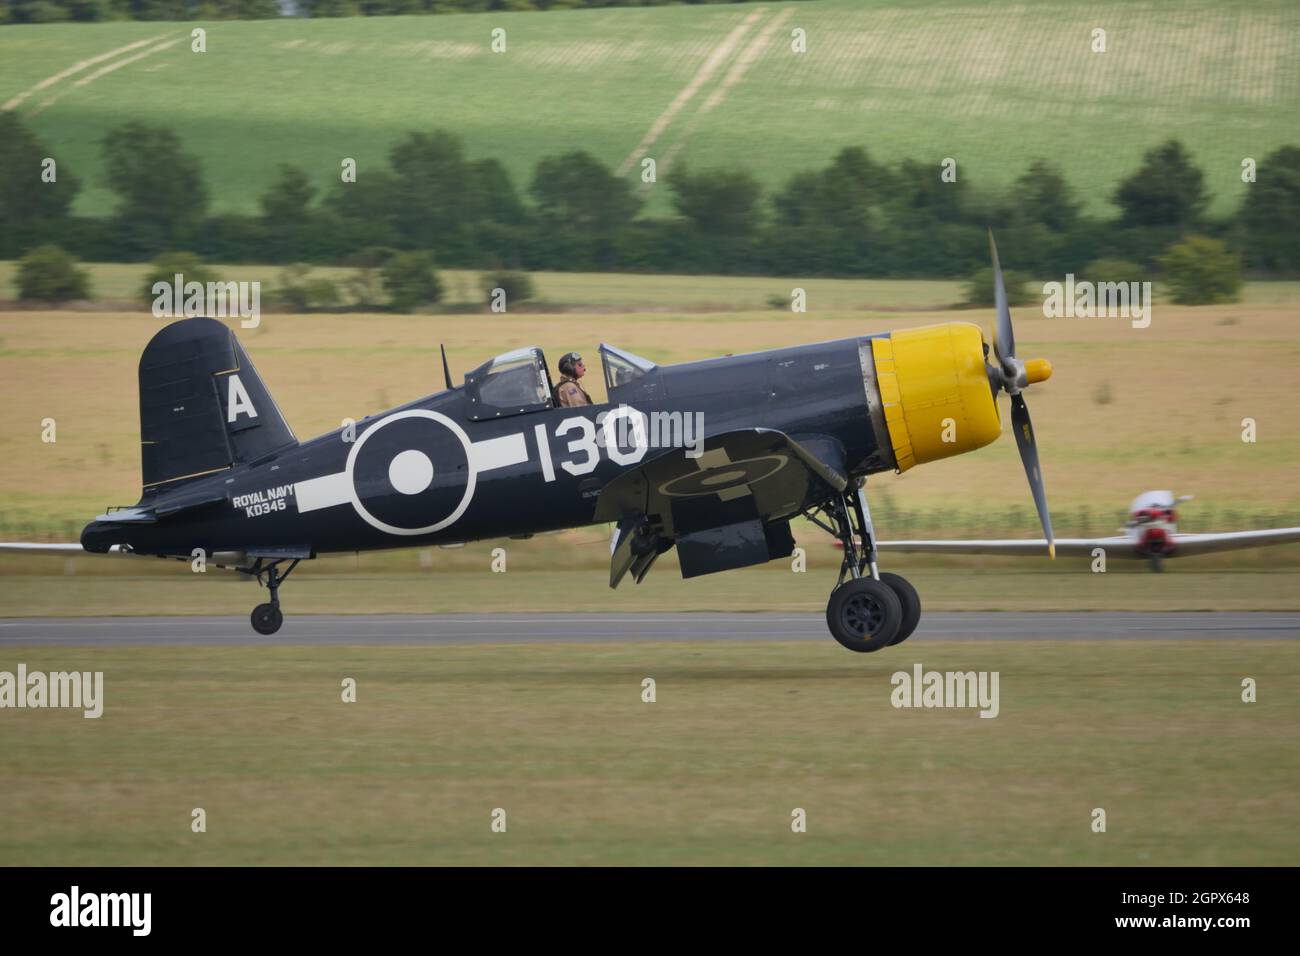 Duxford England Flying Legends Air Show JULY, 11, 2015 Chance Vought F4U Corsair. The F4U Corsair is a United States carrier based fighter aircraft used in World War II and the Korean War.  Stock Photo